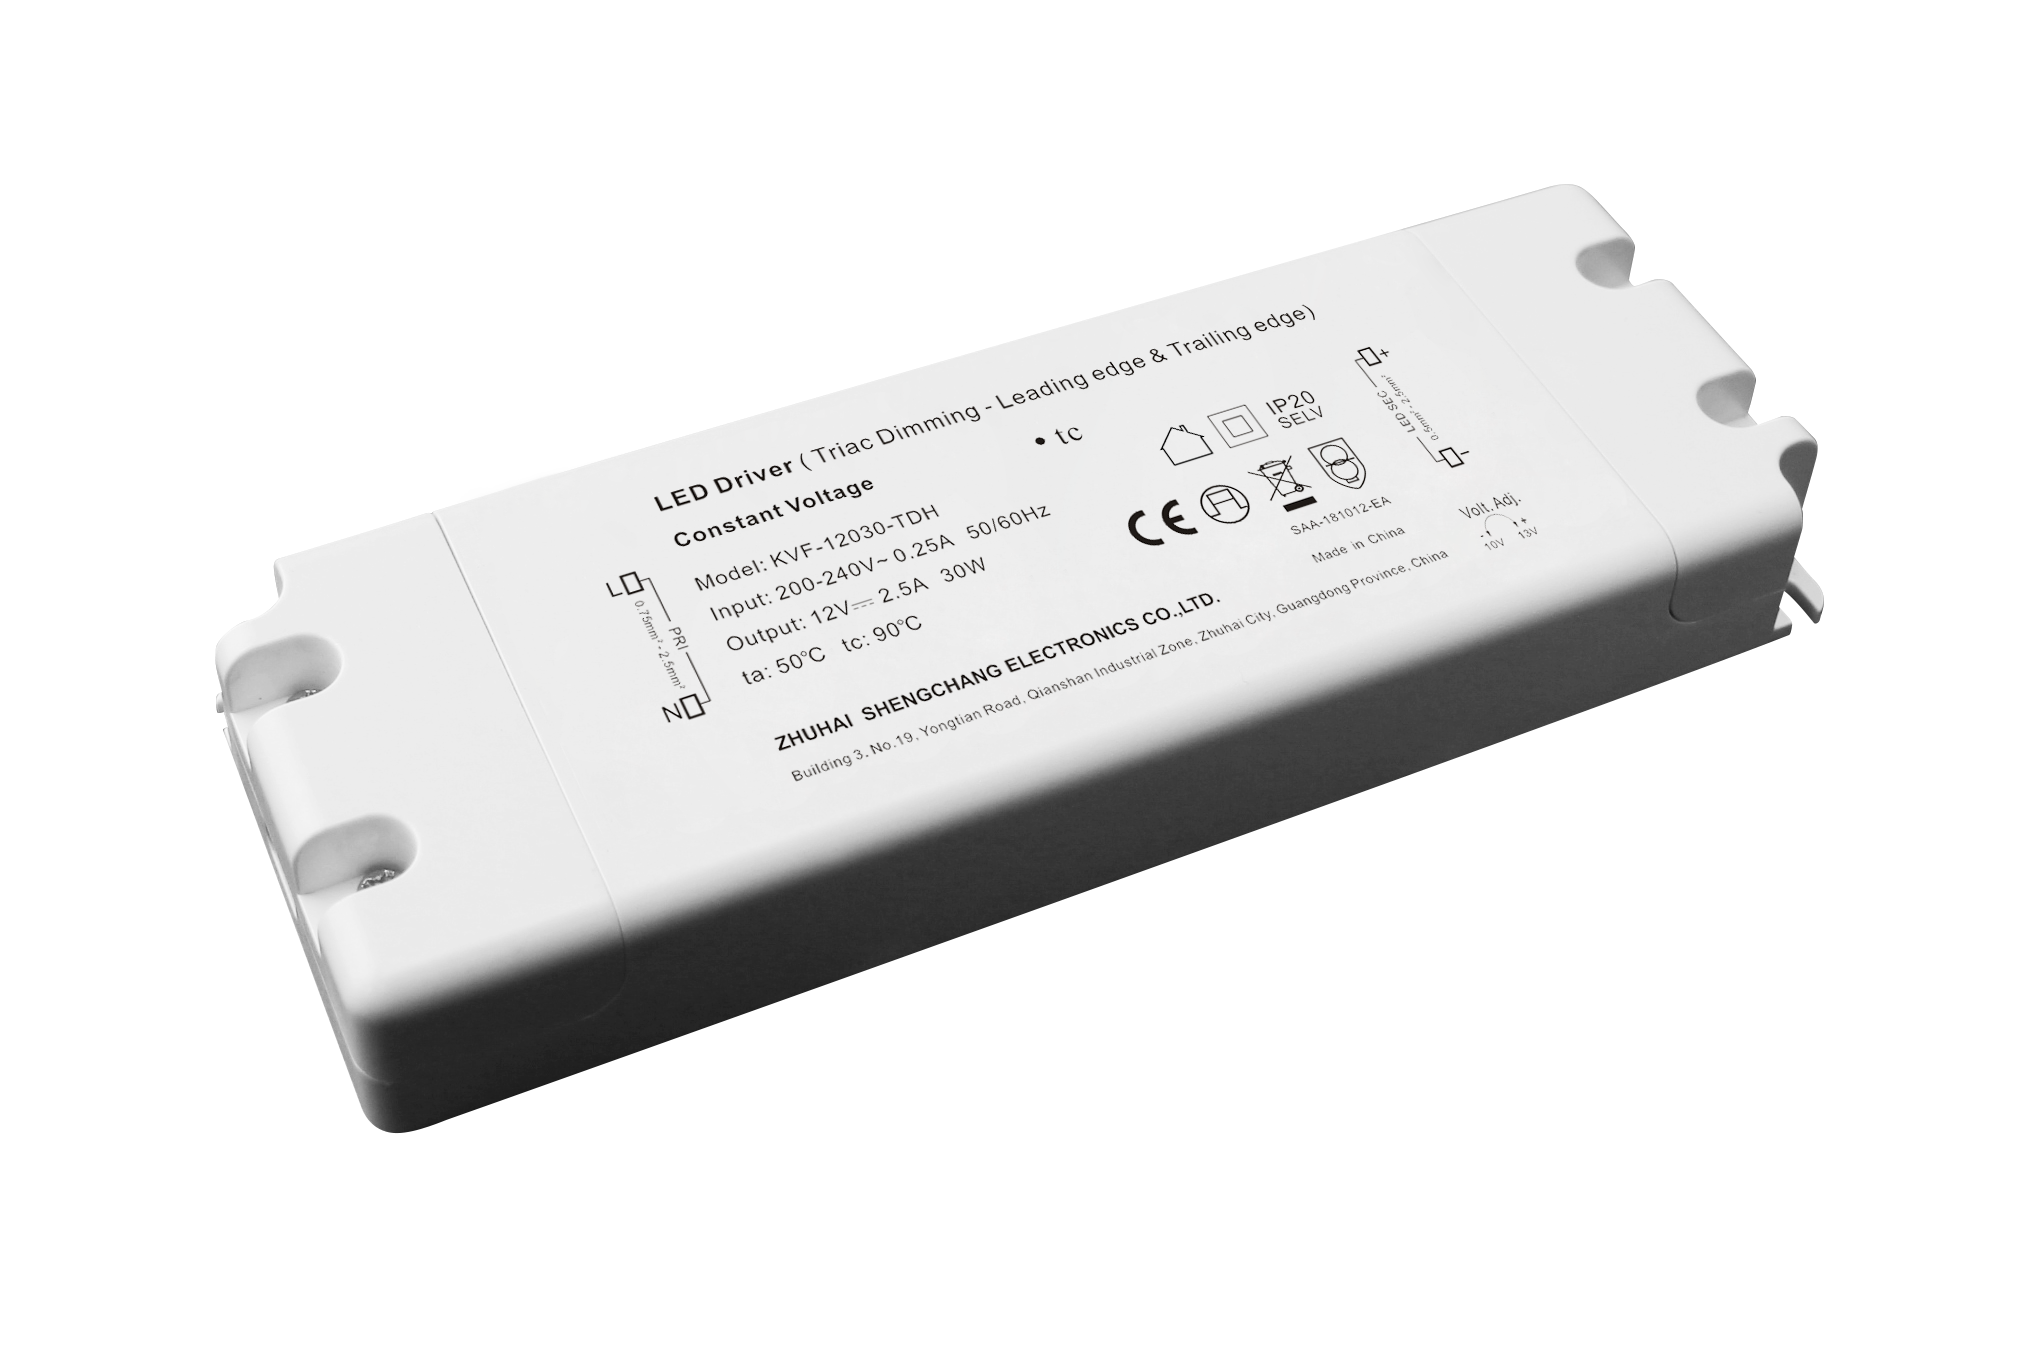 KVF-TDH series 30W Constant Voltage Triac Dimmable LED Driver